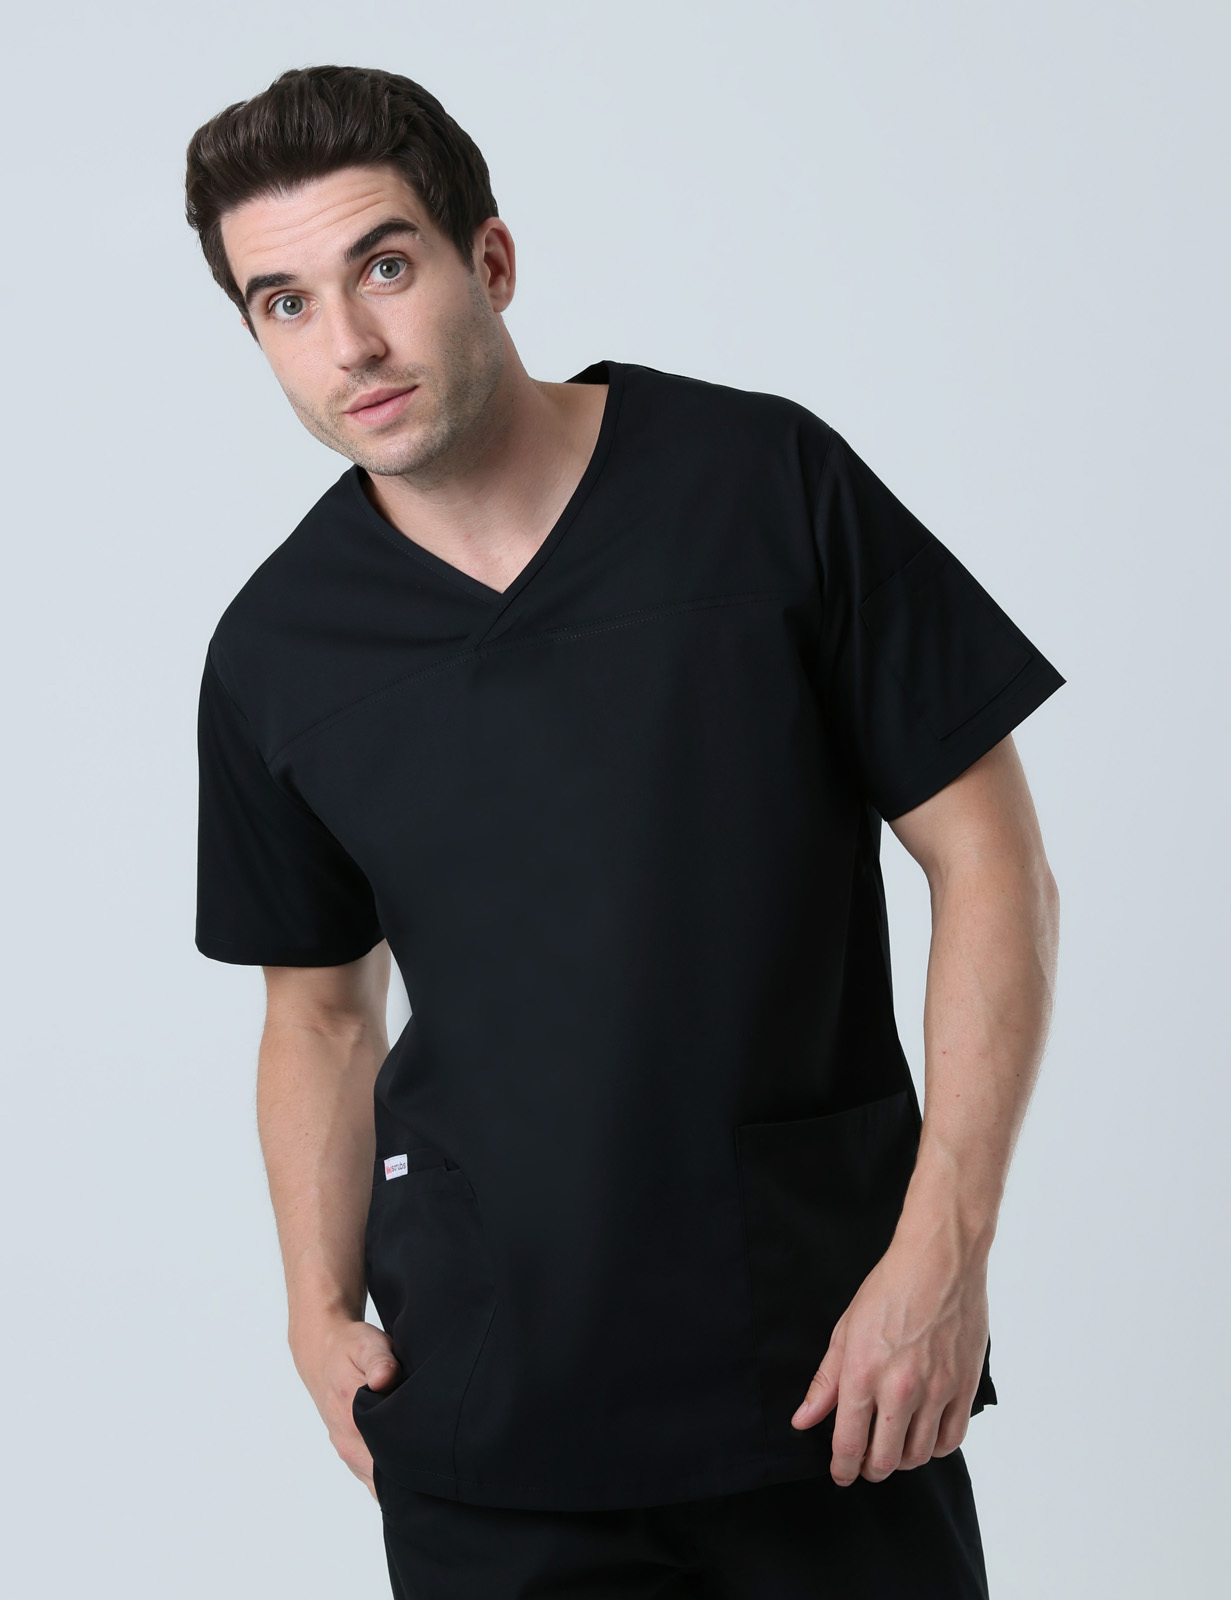 North Shore Private Hospital Sonographer Uniform Top Only Bundle (Men's Fit Solid  Top in Black + Logo)